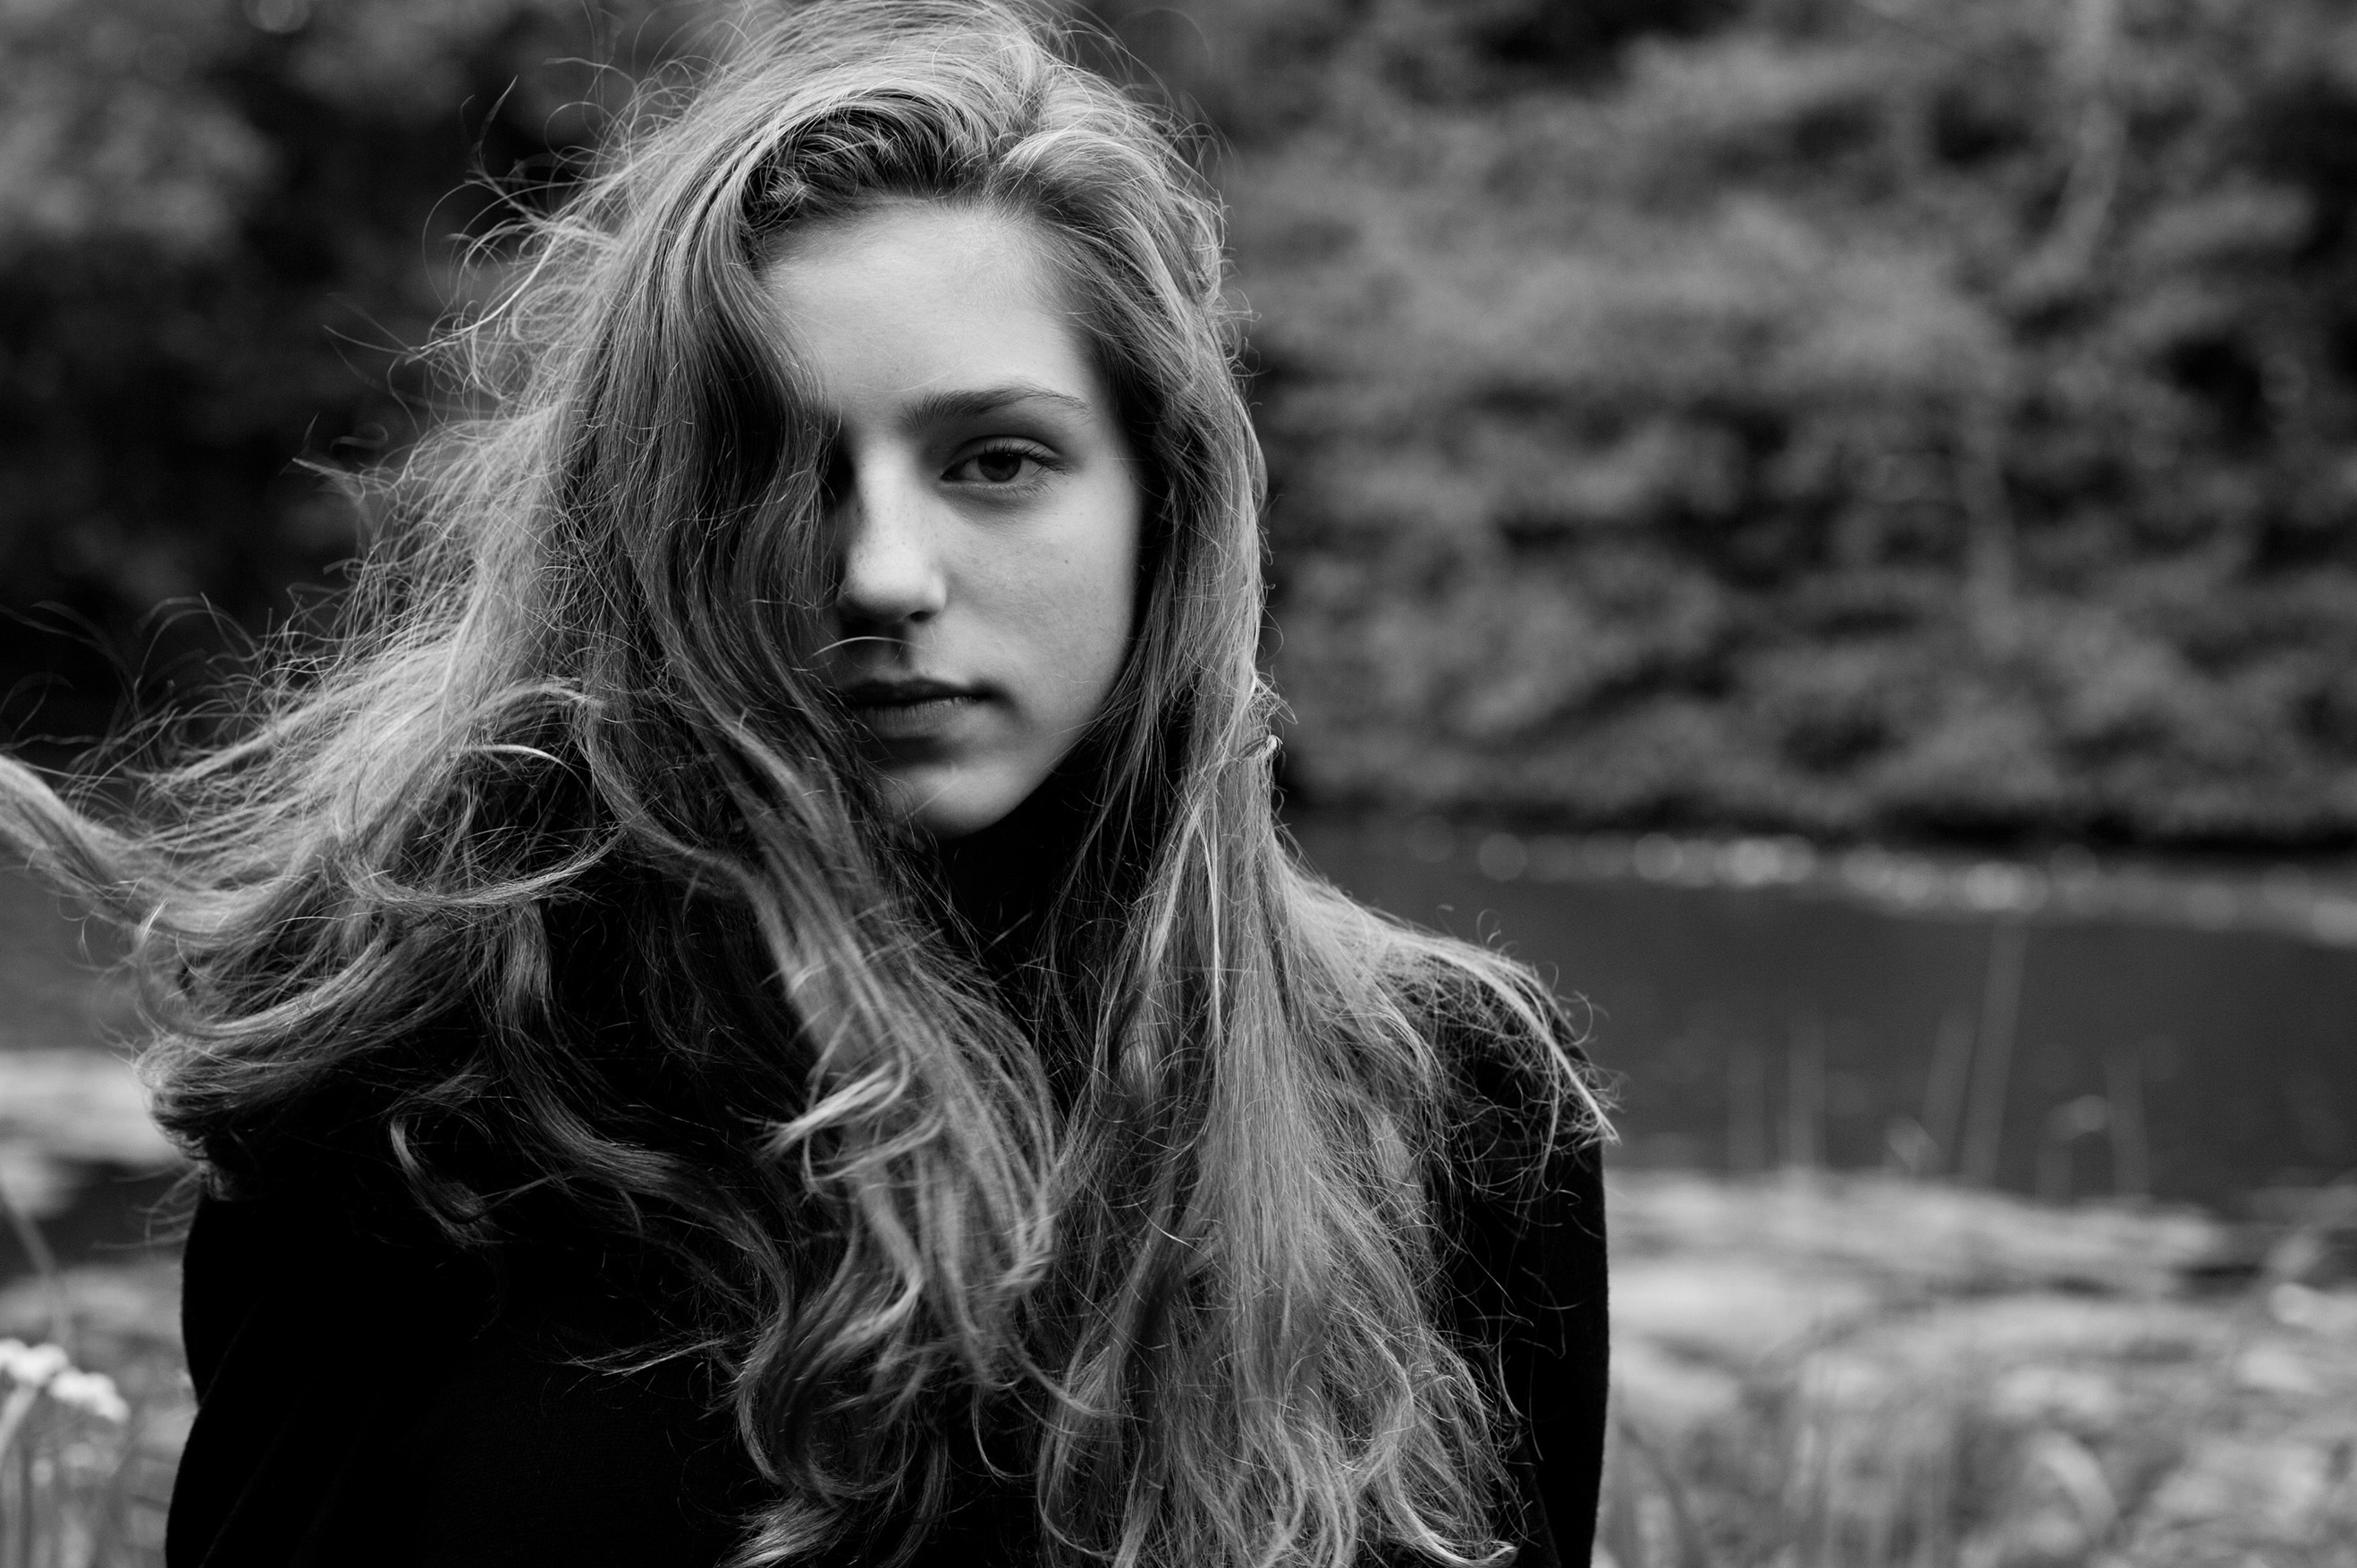 Birdy Women Singer Brunette Long Hair Young Woman Hair Covering Eyes Monochrome Outdoors Nature 2636x1754